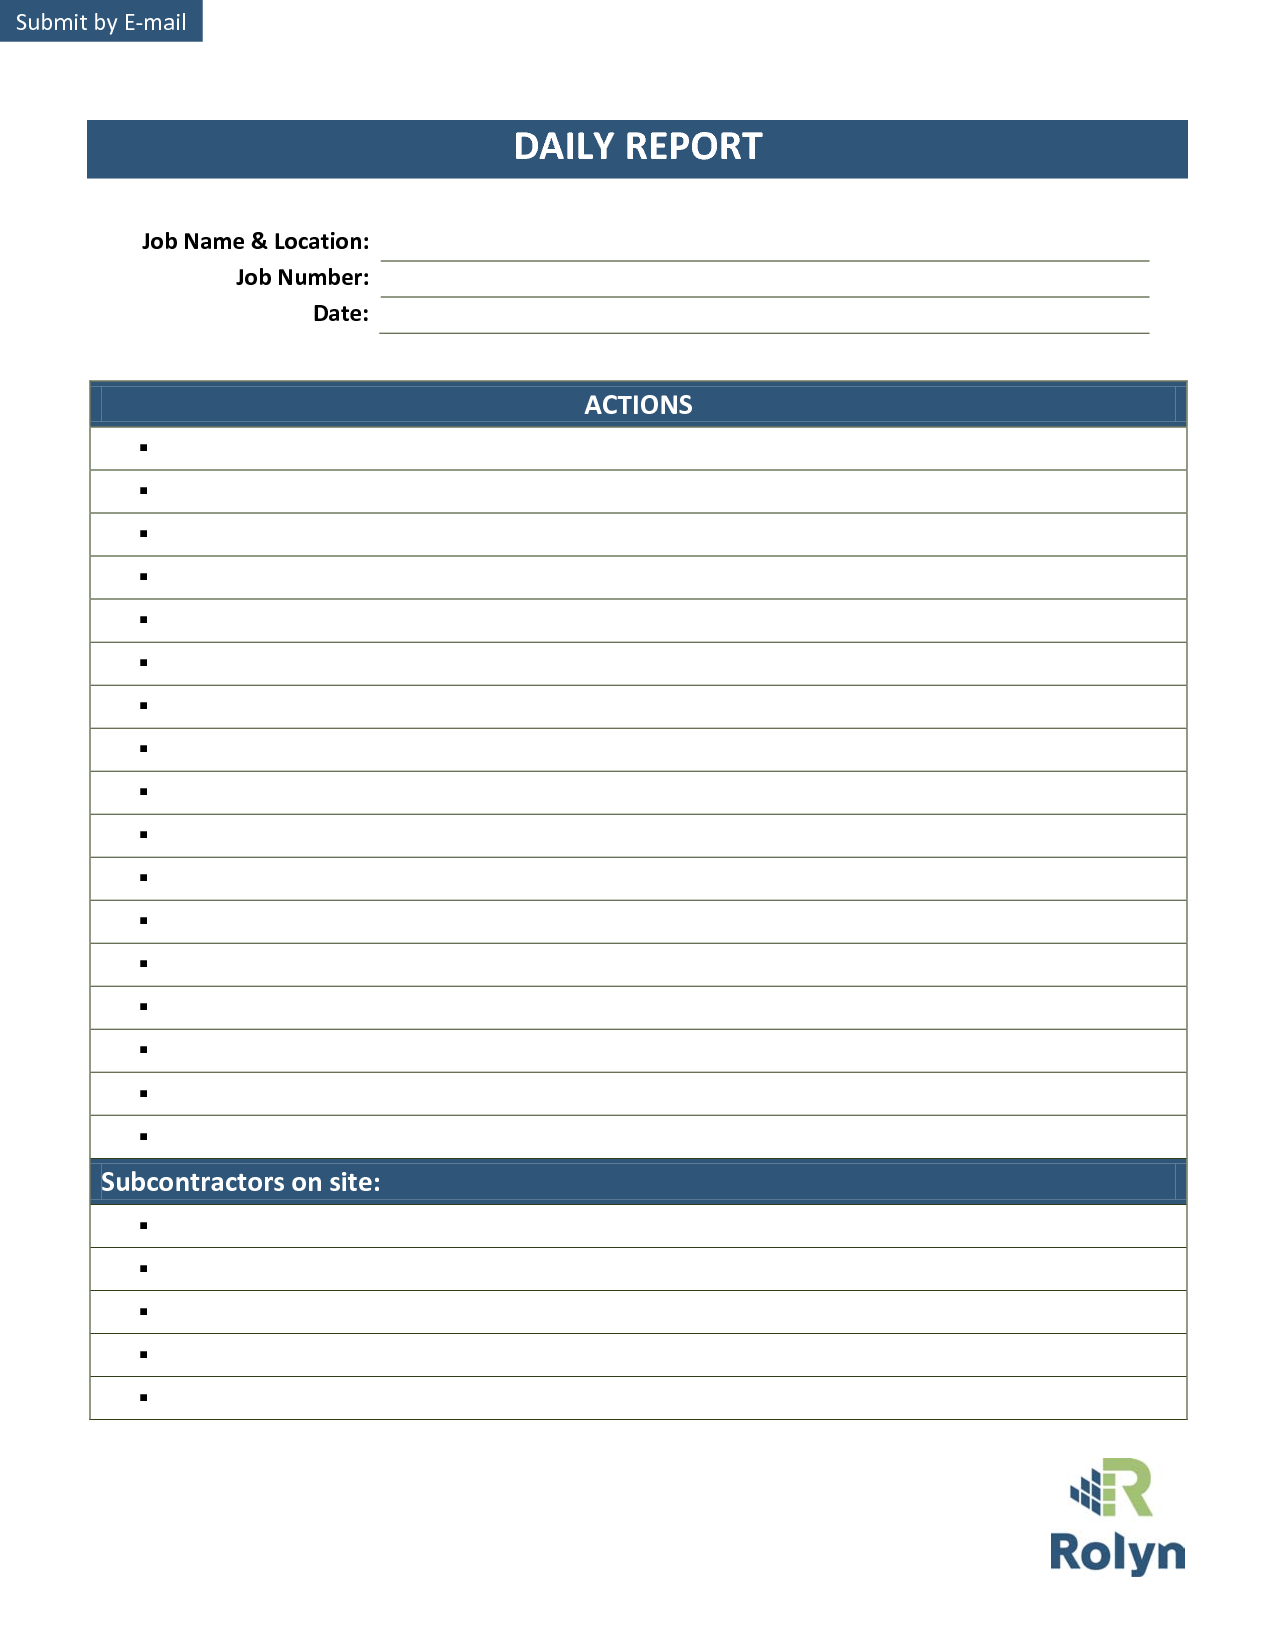 27 Images Of Daily Field Report Template Ms Word | Masorler With Regard To Field Report Template